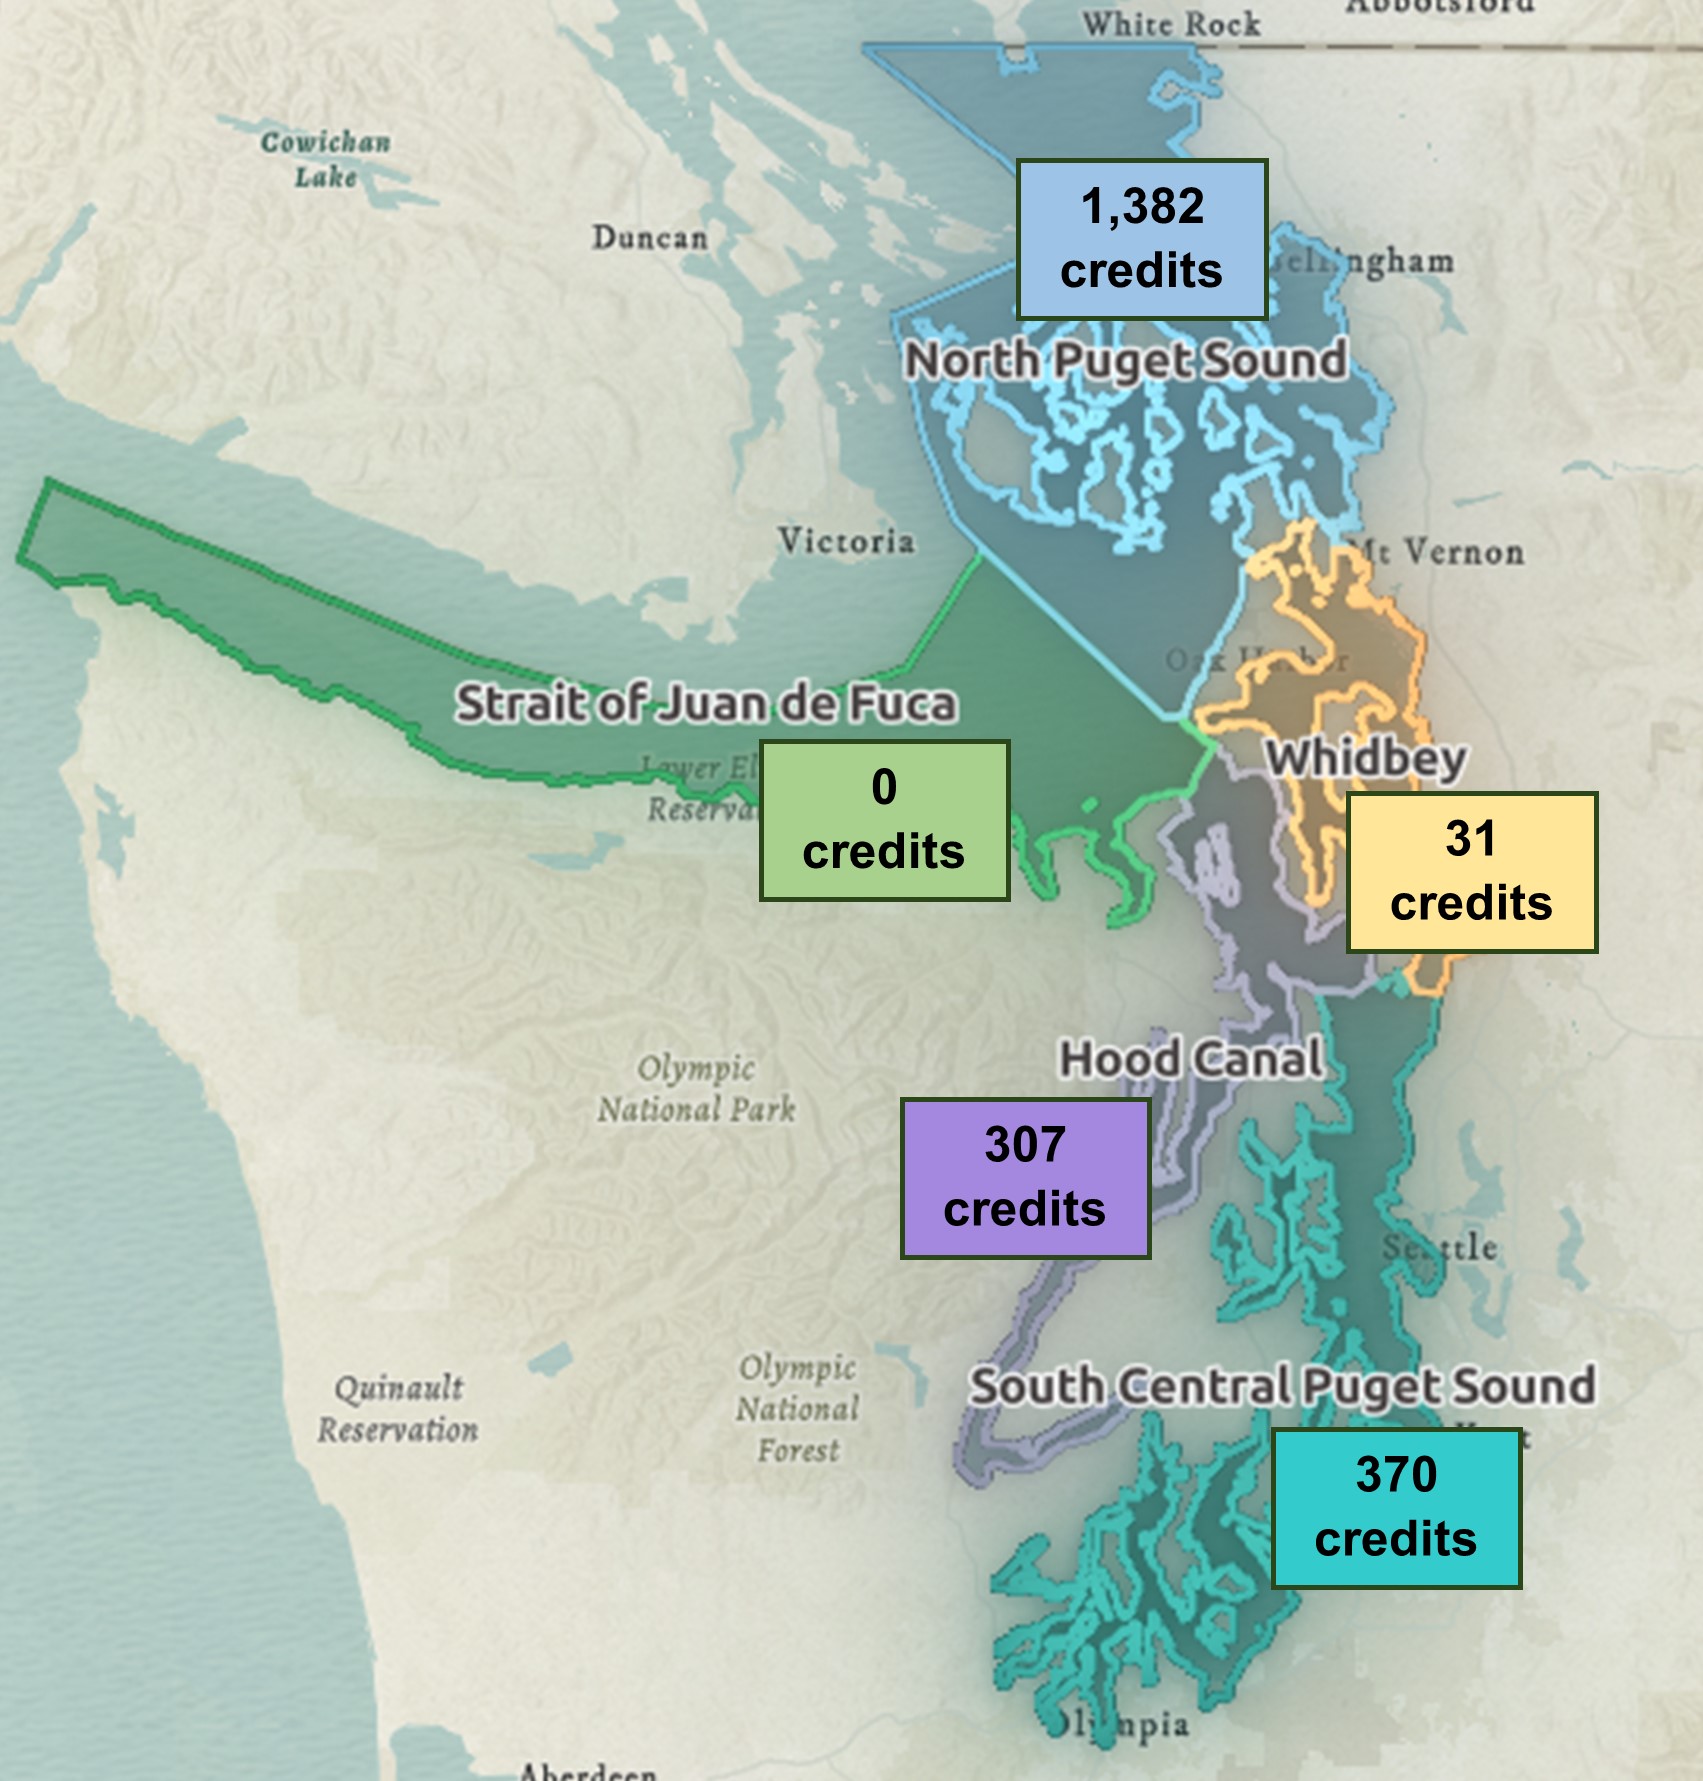 A map graphic that shows how many conservation credits the Partnership has sold in each marine service area. The Partnership has sold 1,382 credits in the North Puget Sound service area; O credits in the Strait of Juan de Fuca service area; 31 credits in the Whidbey service area; 307 credits in the Hood Canal service area; and 370 credits in the South Central Puget Sound service area.